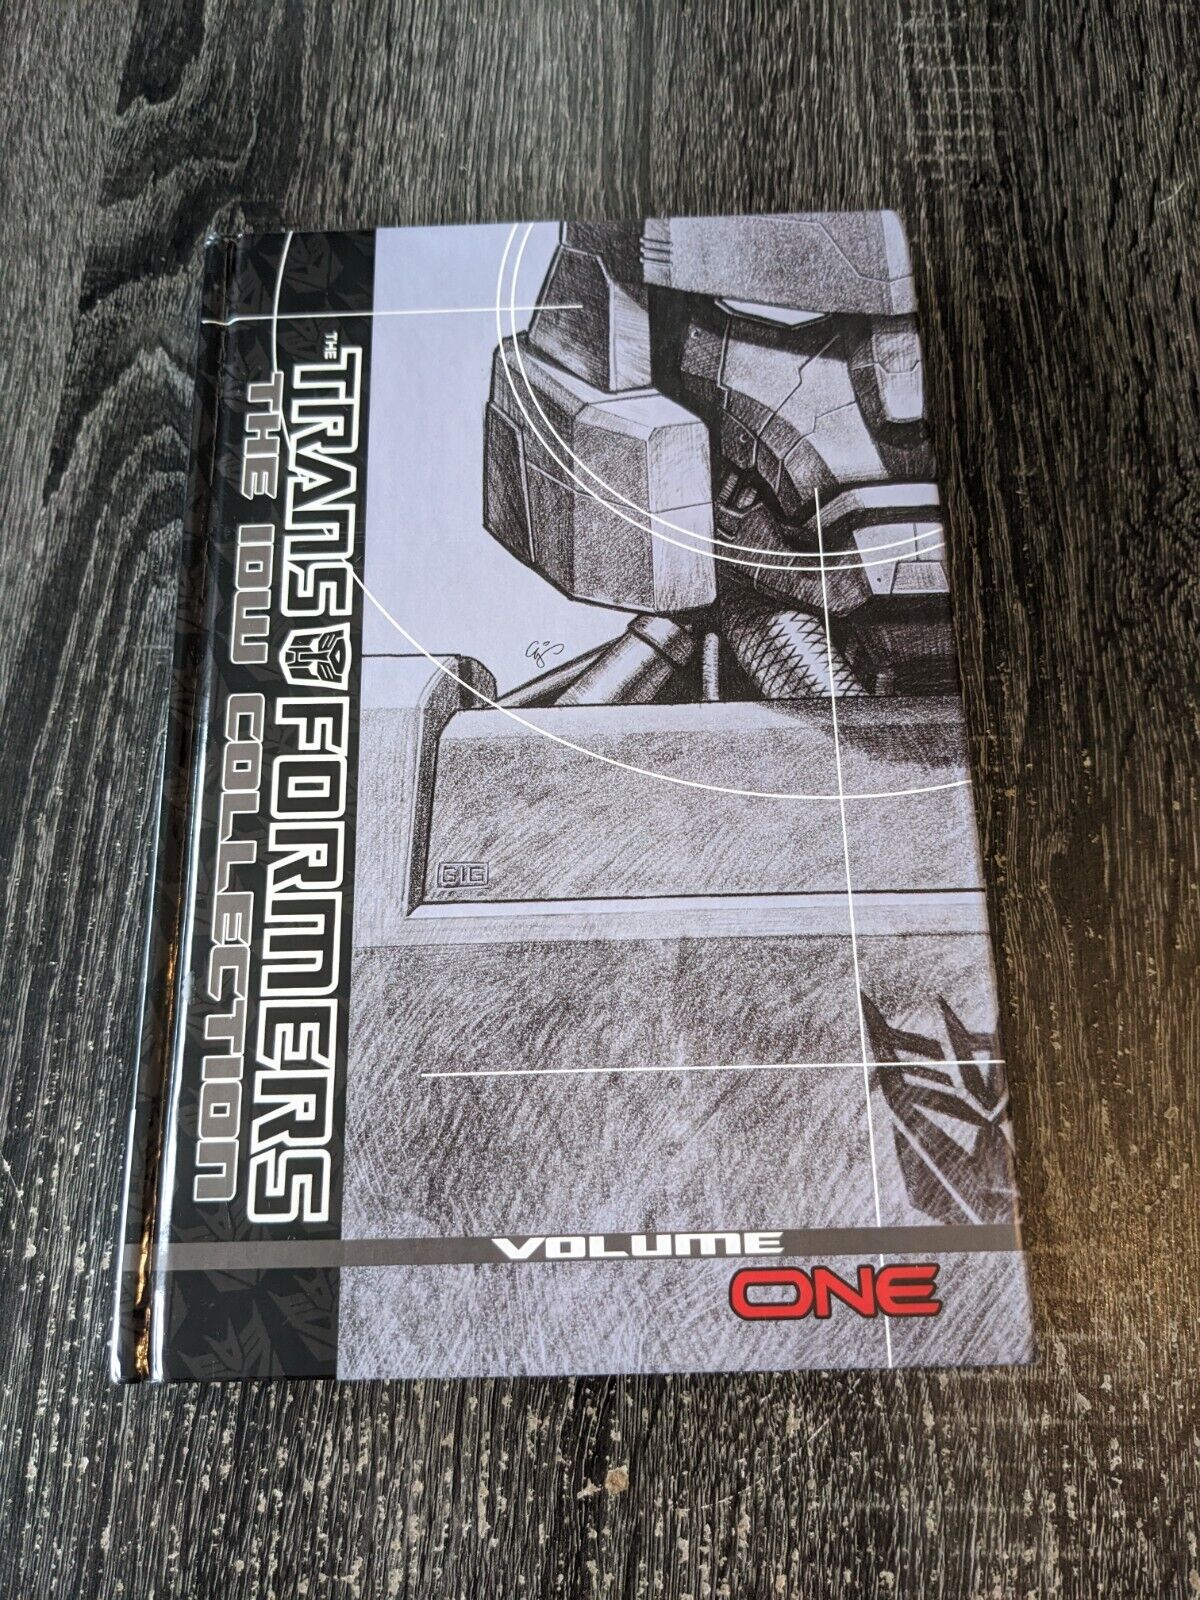 The Transformers: the IDW Collection #1 (IDW Publishing May 2010)